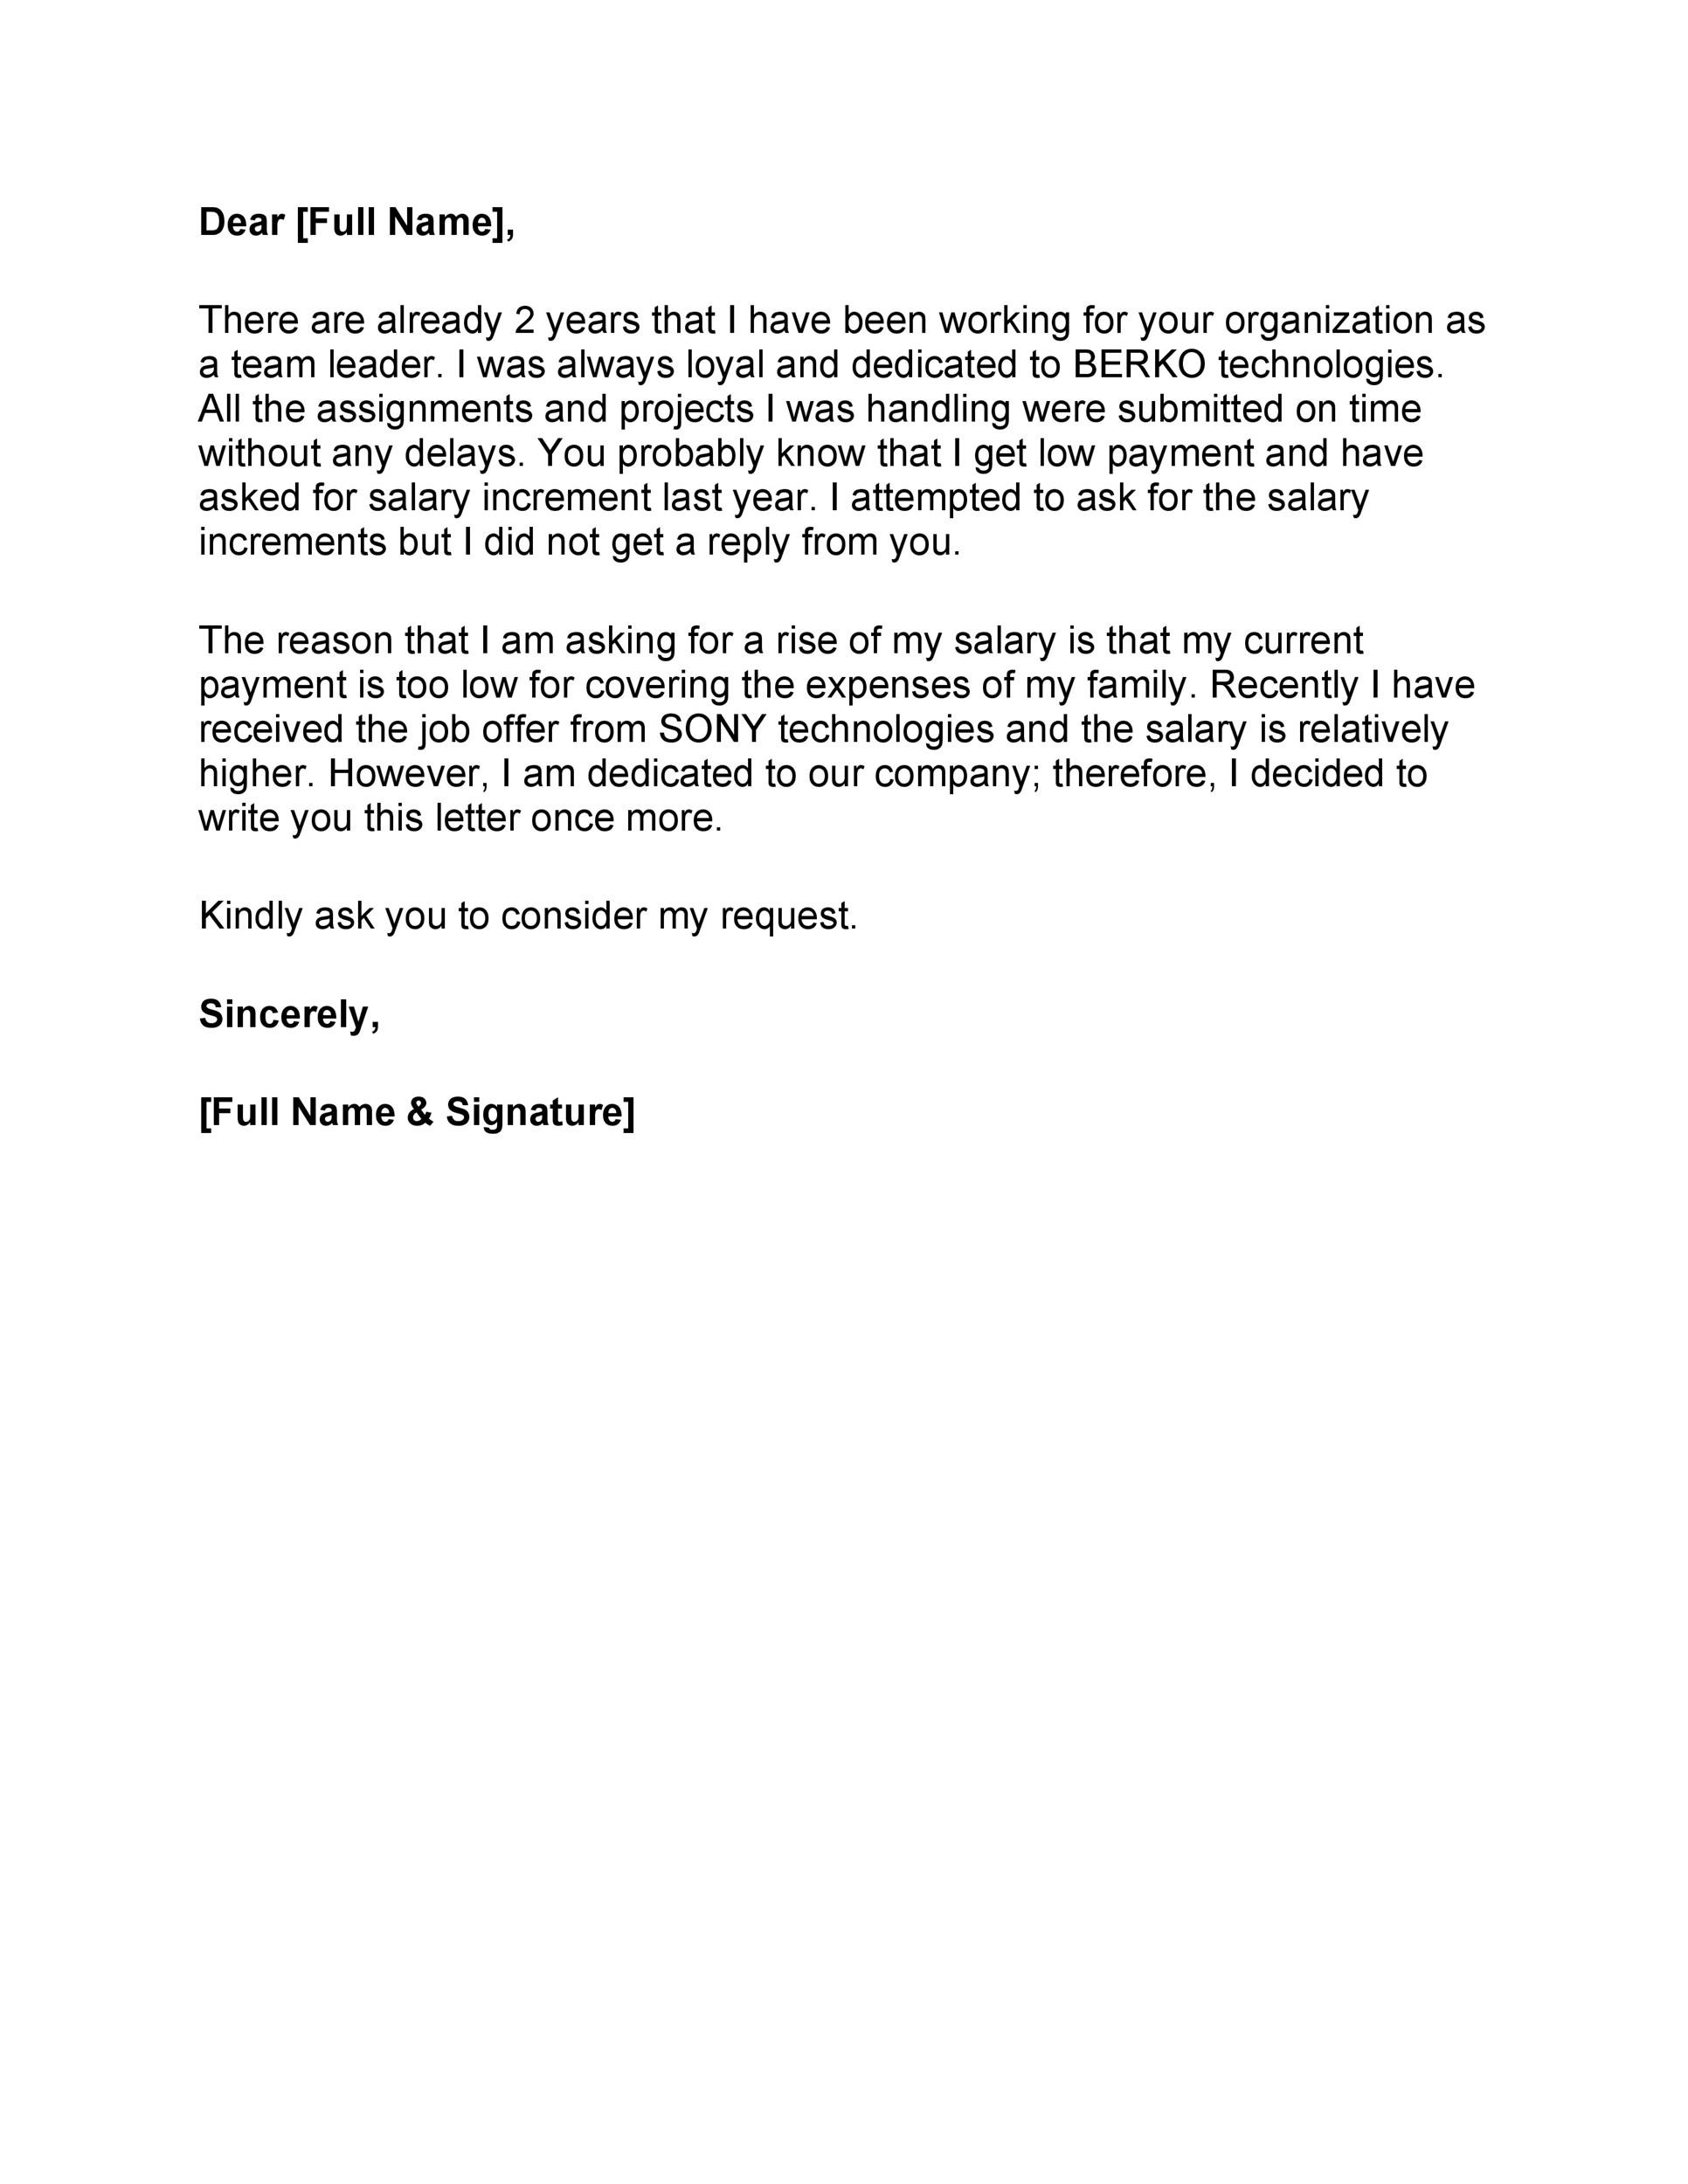 Pay Raise Letter To Employee from templatelab.com